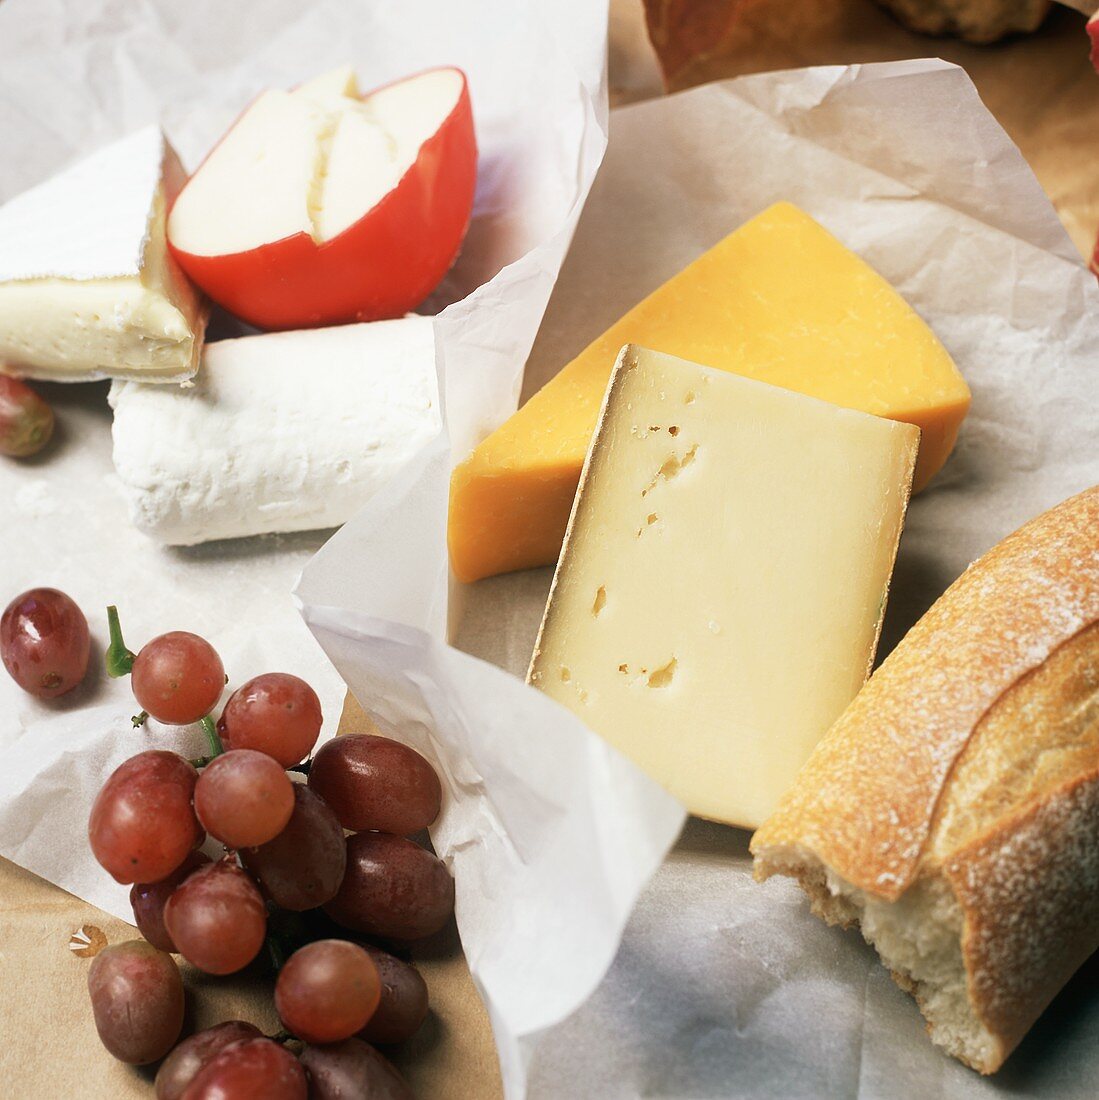 A Cheese Assortment on Paper with Bread and Grapes